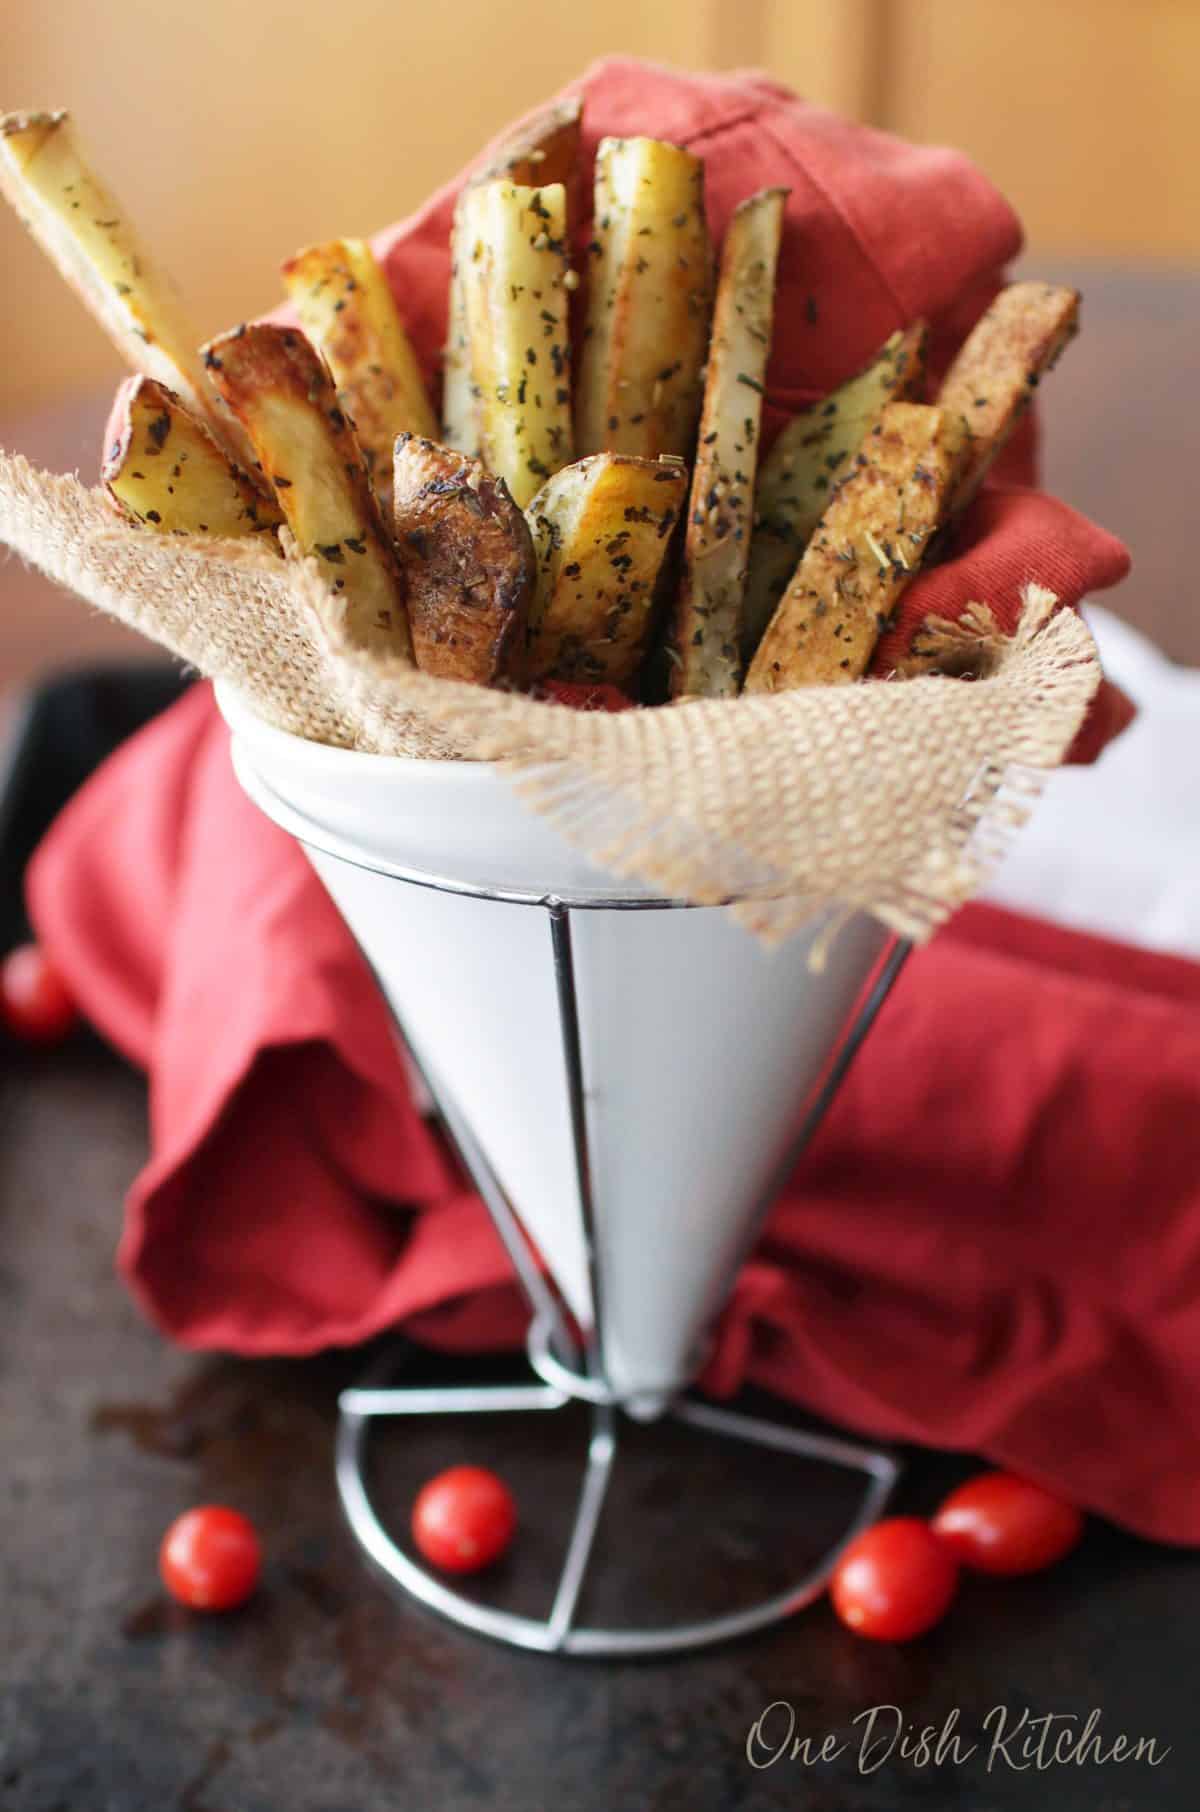 Seasoned french fries in a tall dish held together by a red cloth napkin and a burlap napkin 